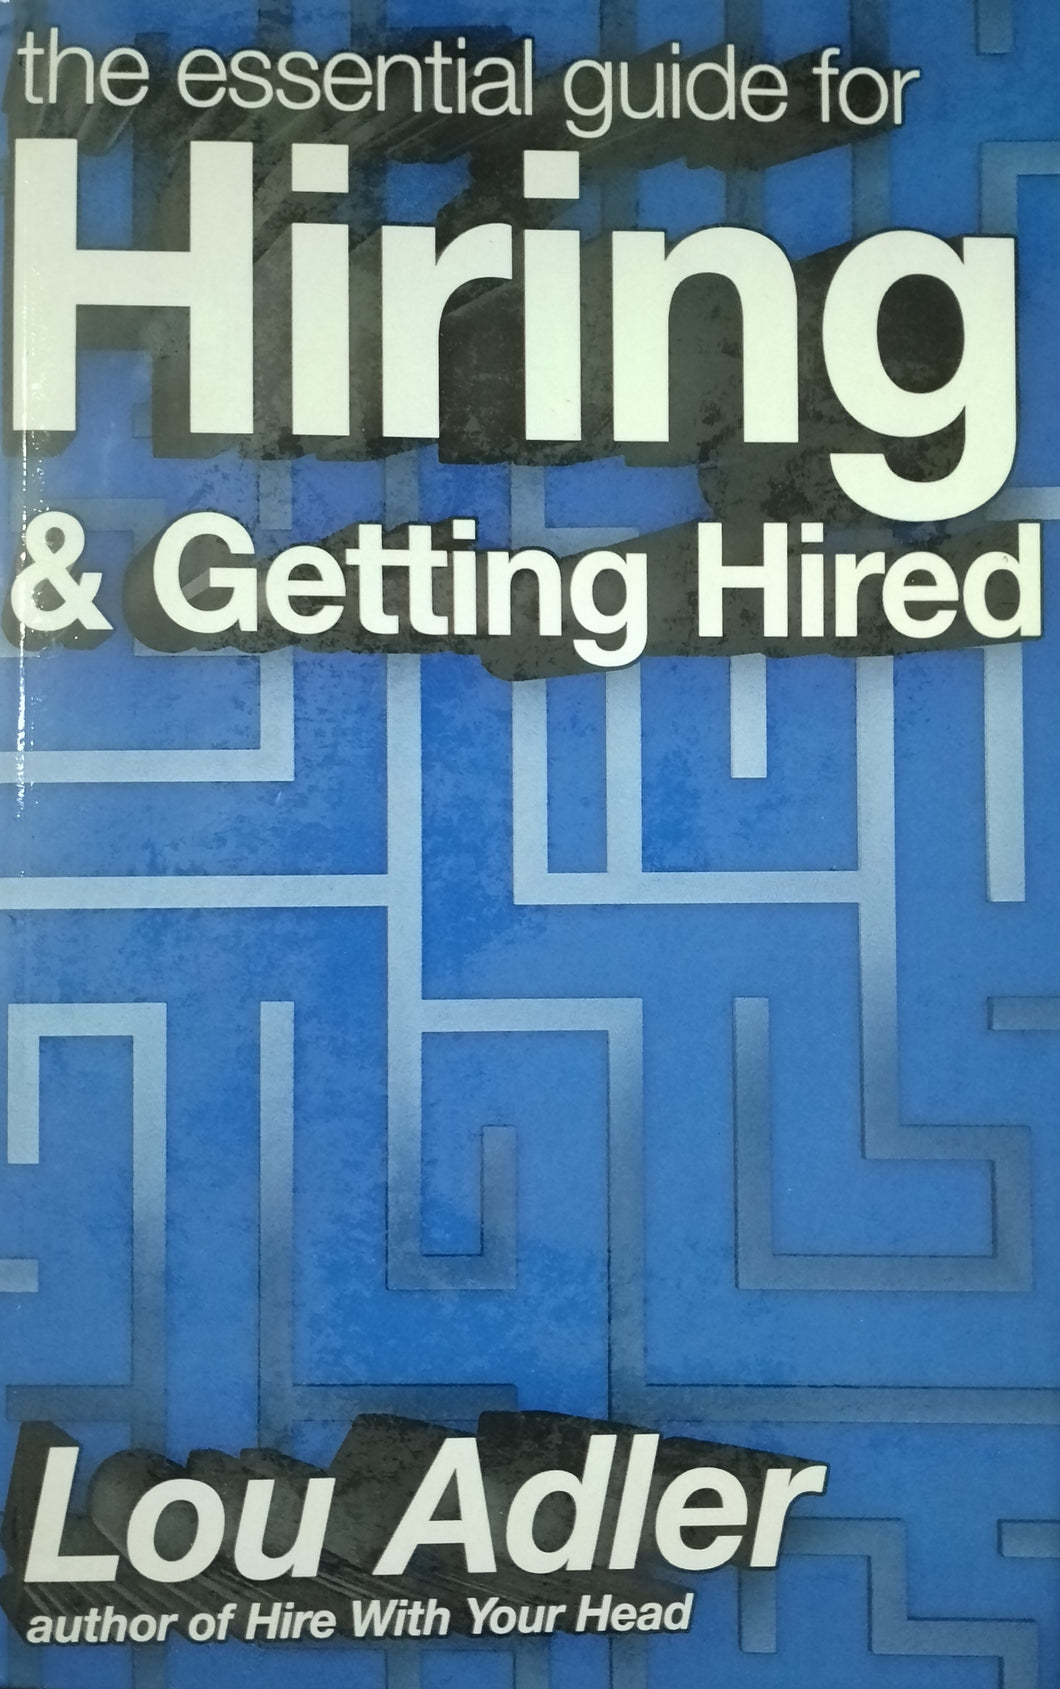 The Essential Guide For Hiring & Getting Hired by Lou Adler - Books for Less Online Bookstore